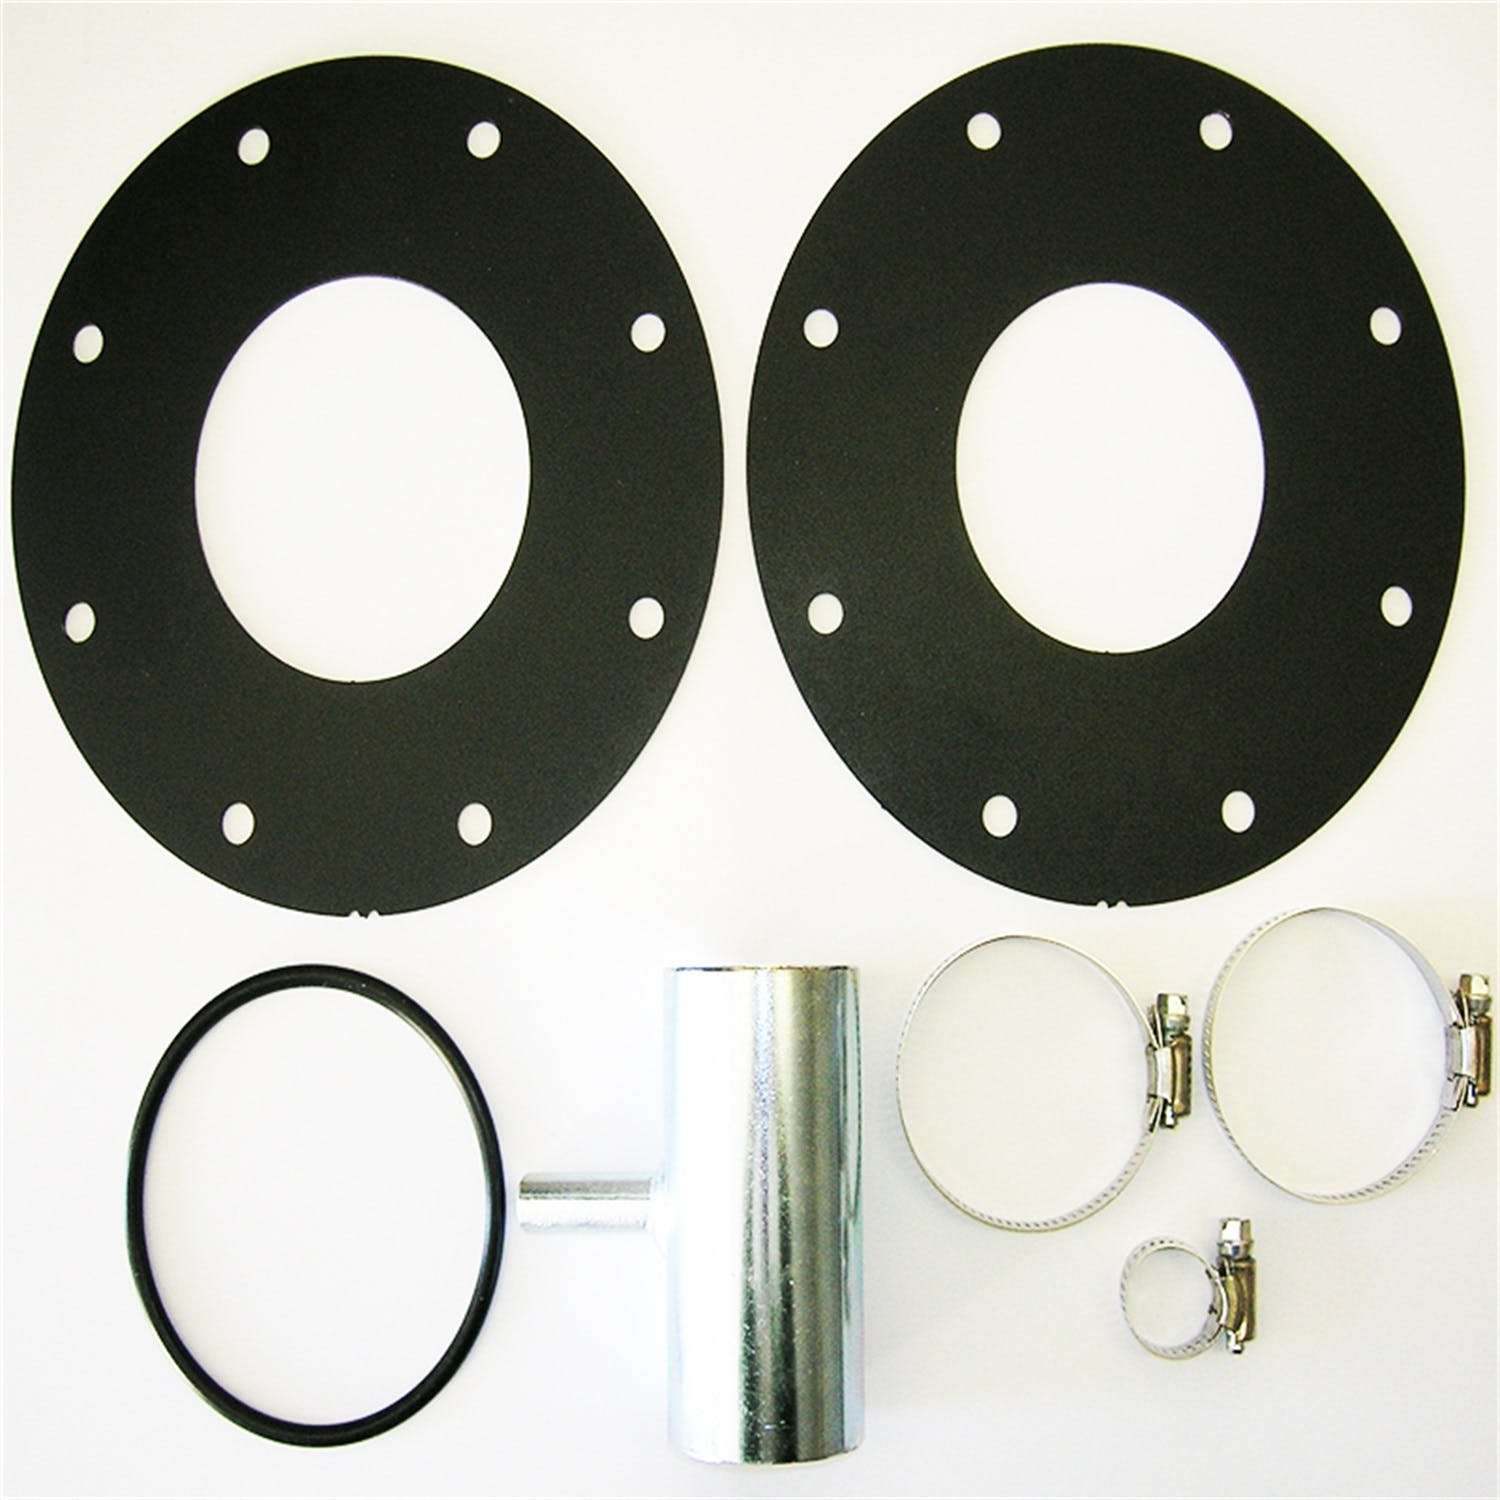 TITAN Fuel Tanks 0199003 LB7 Adaption Kit, Includes Two Heavy Gauge Metal Flanges And One O-Ring